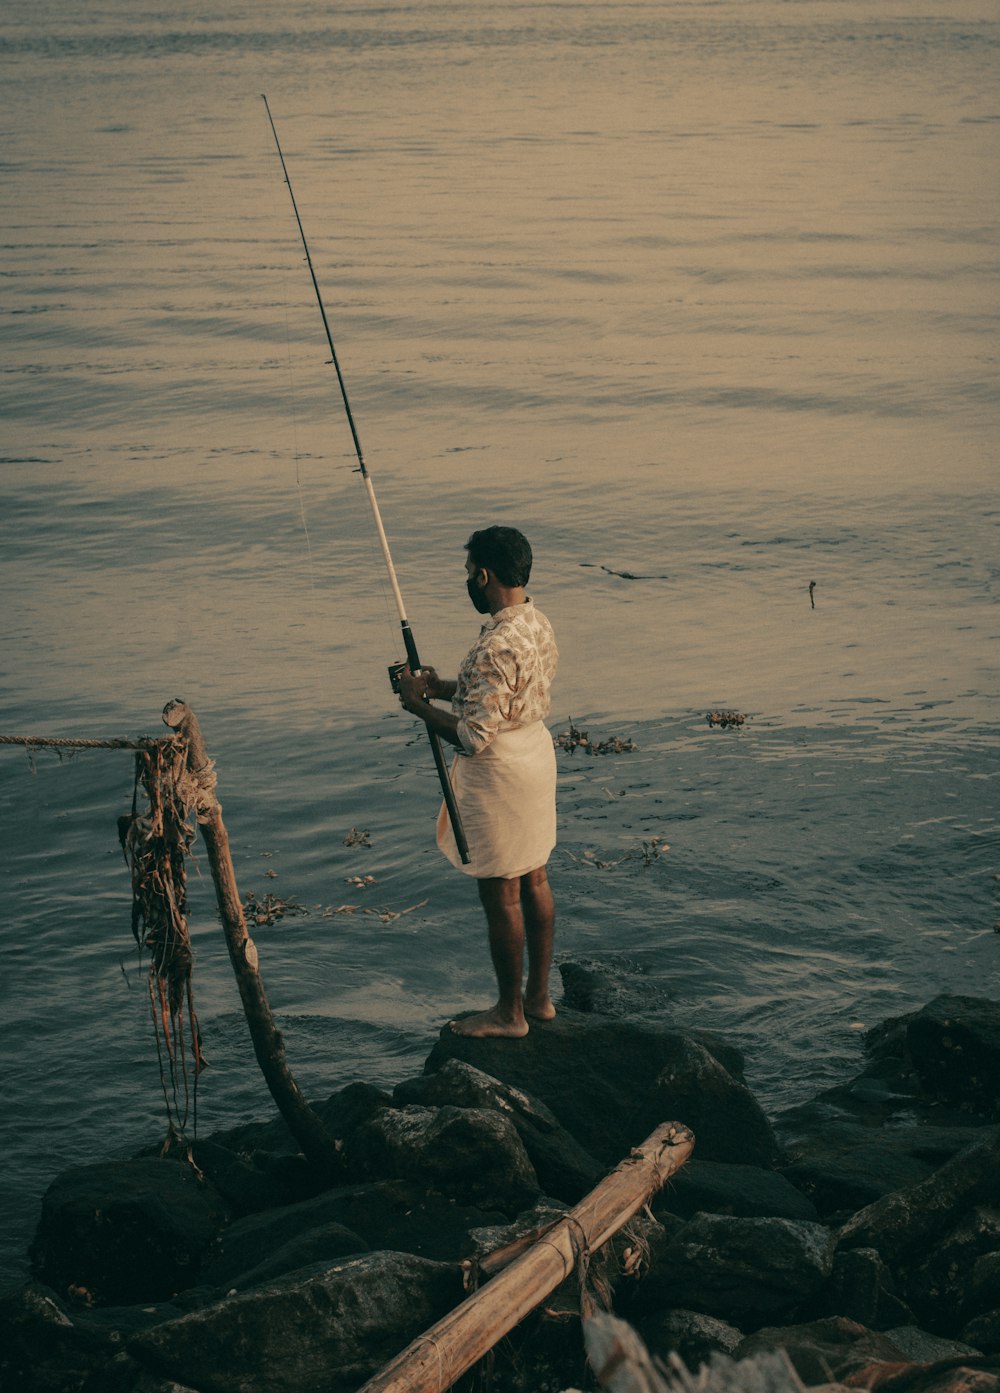 man and woman fishing on sea during daytime